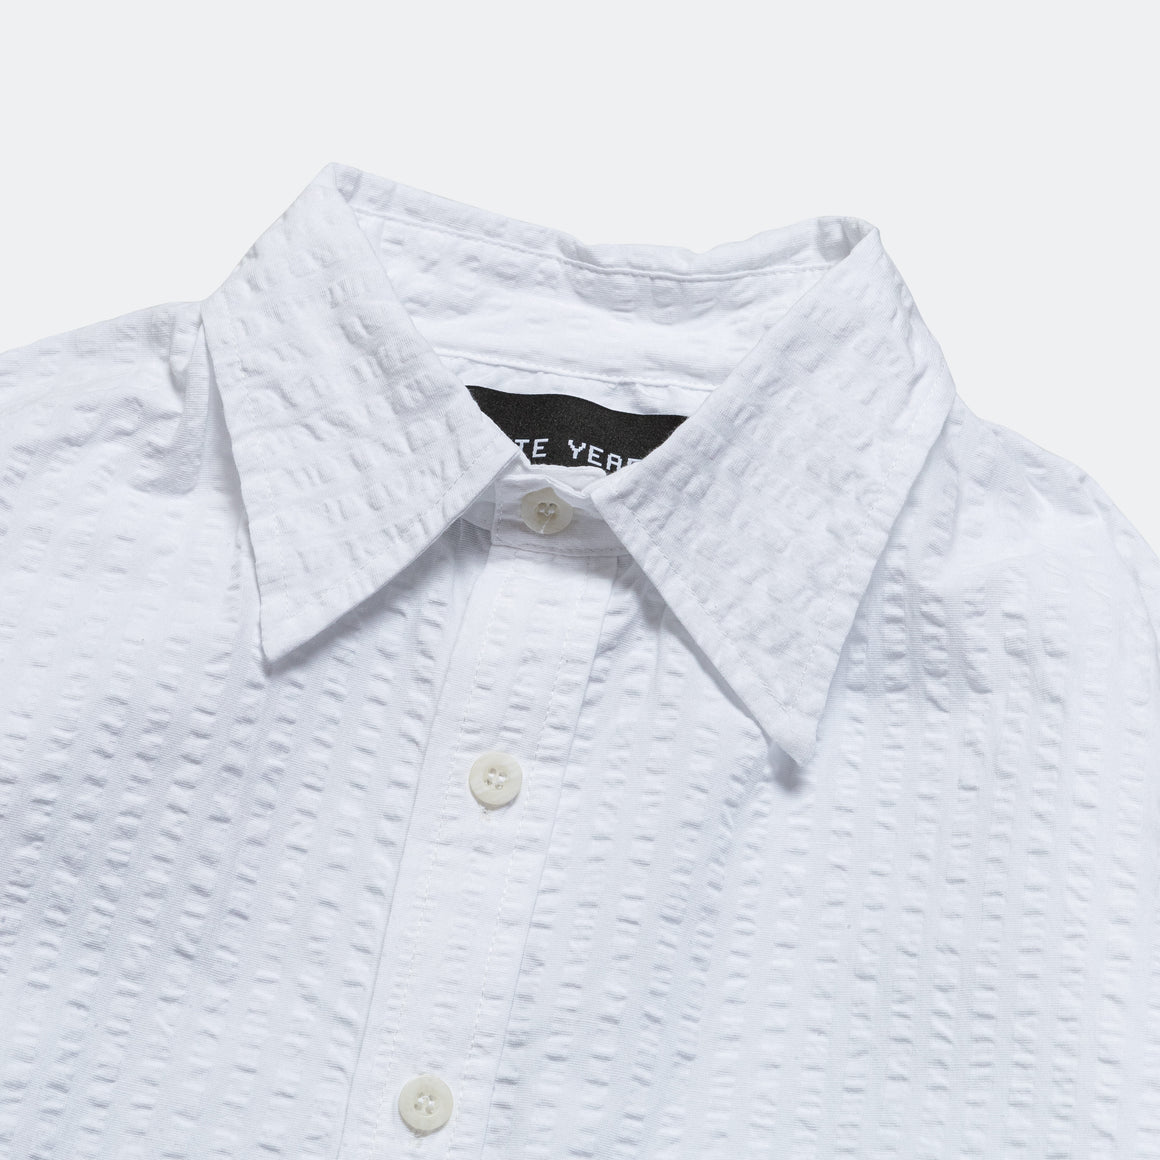 Lite Year - Wide Seersucker Button Up Shirt - White - UP THERE